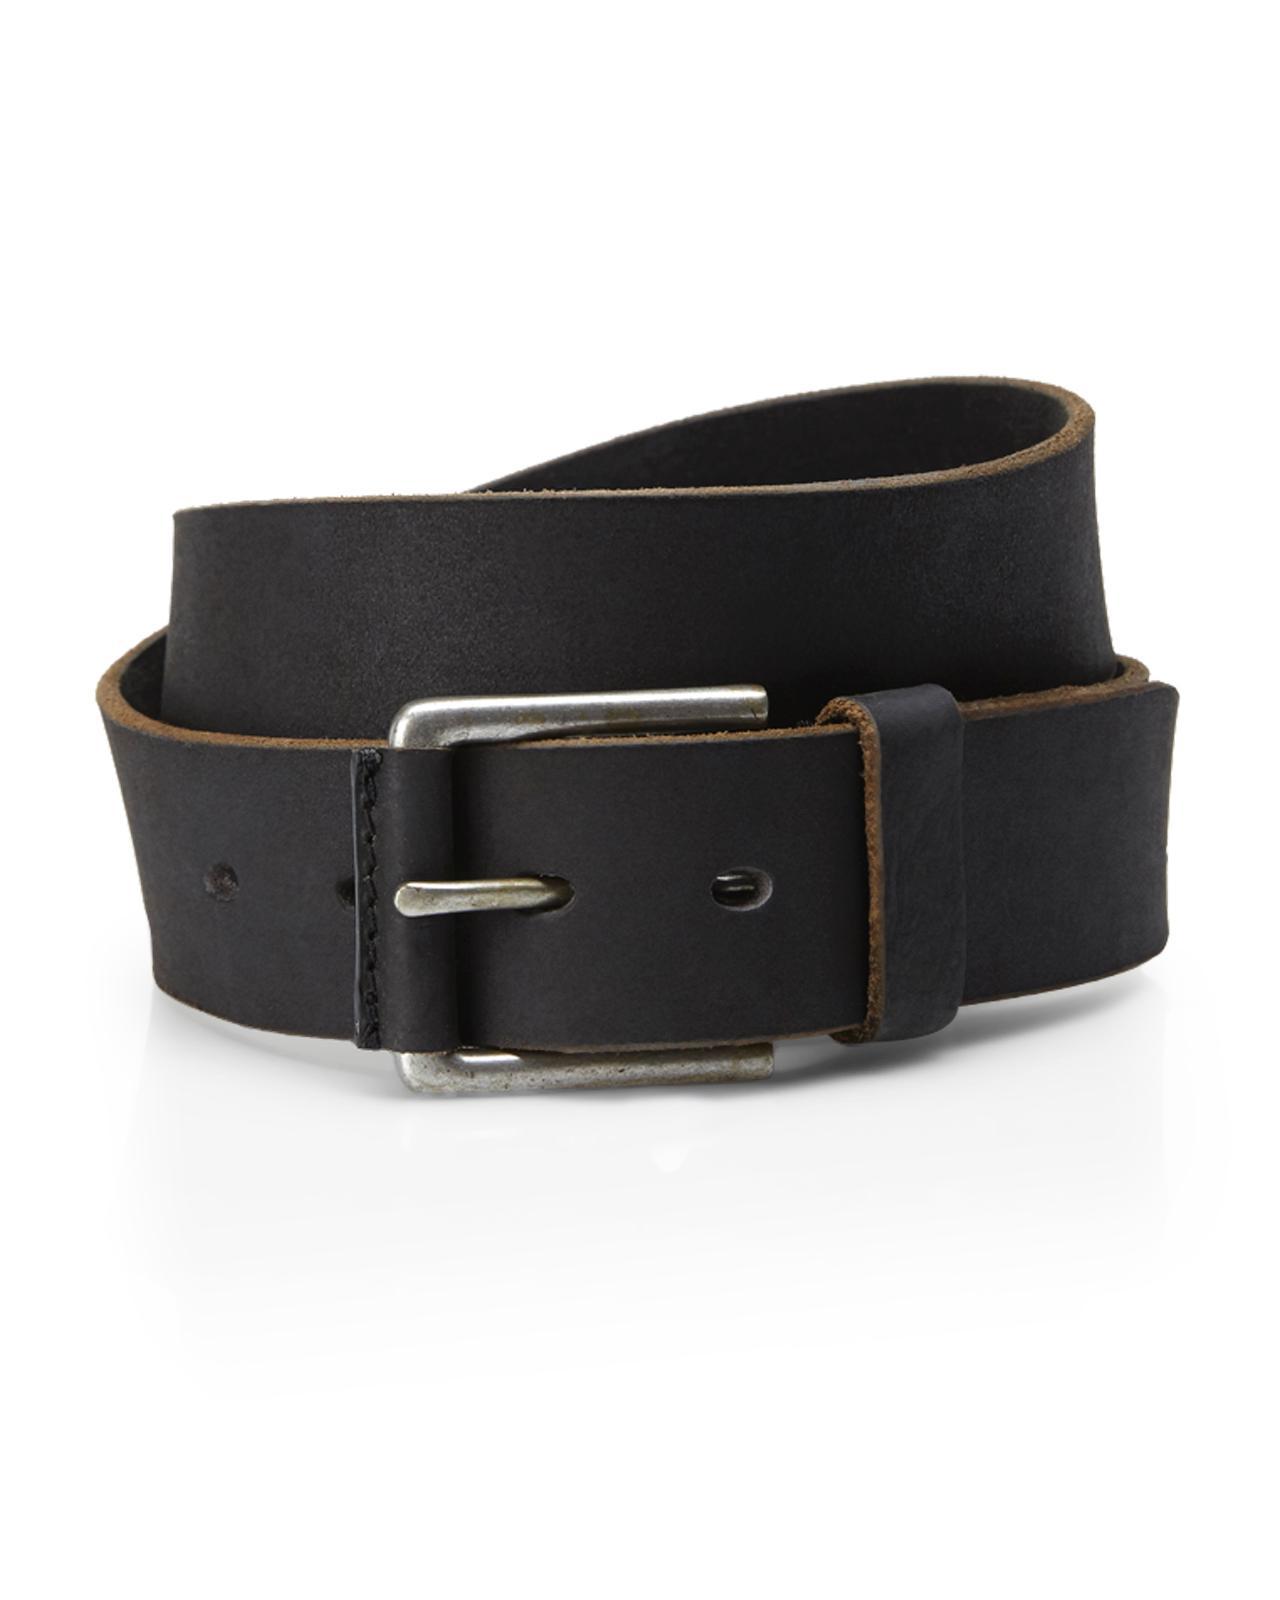 Timberland Leather Belt in Brown for Men - Lyst